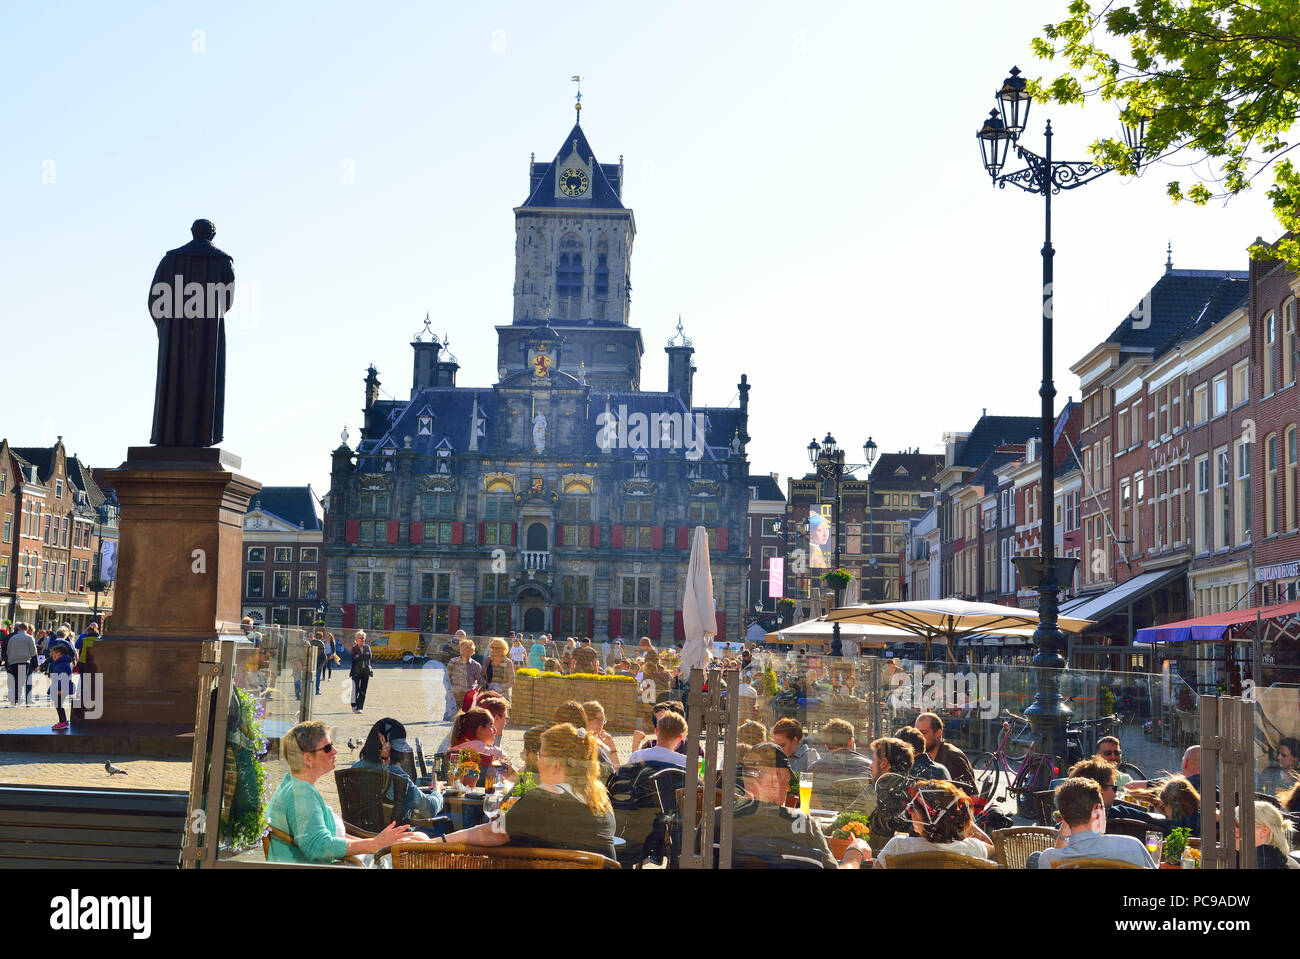 The main square or Markt Square  in the centre of Delft with a view of the Town Hall or Stadhuis Delft,  Holland, Netherlands Stock Photo